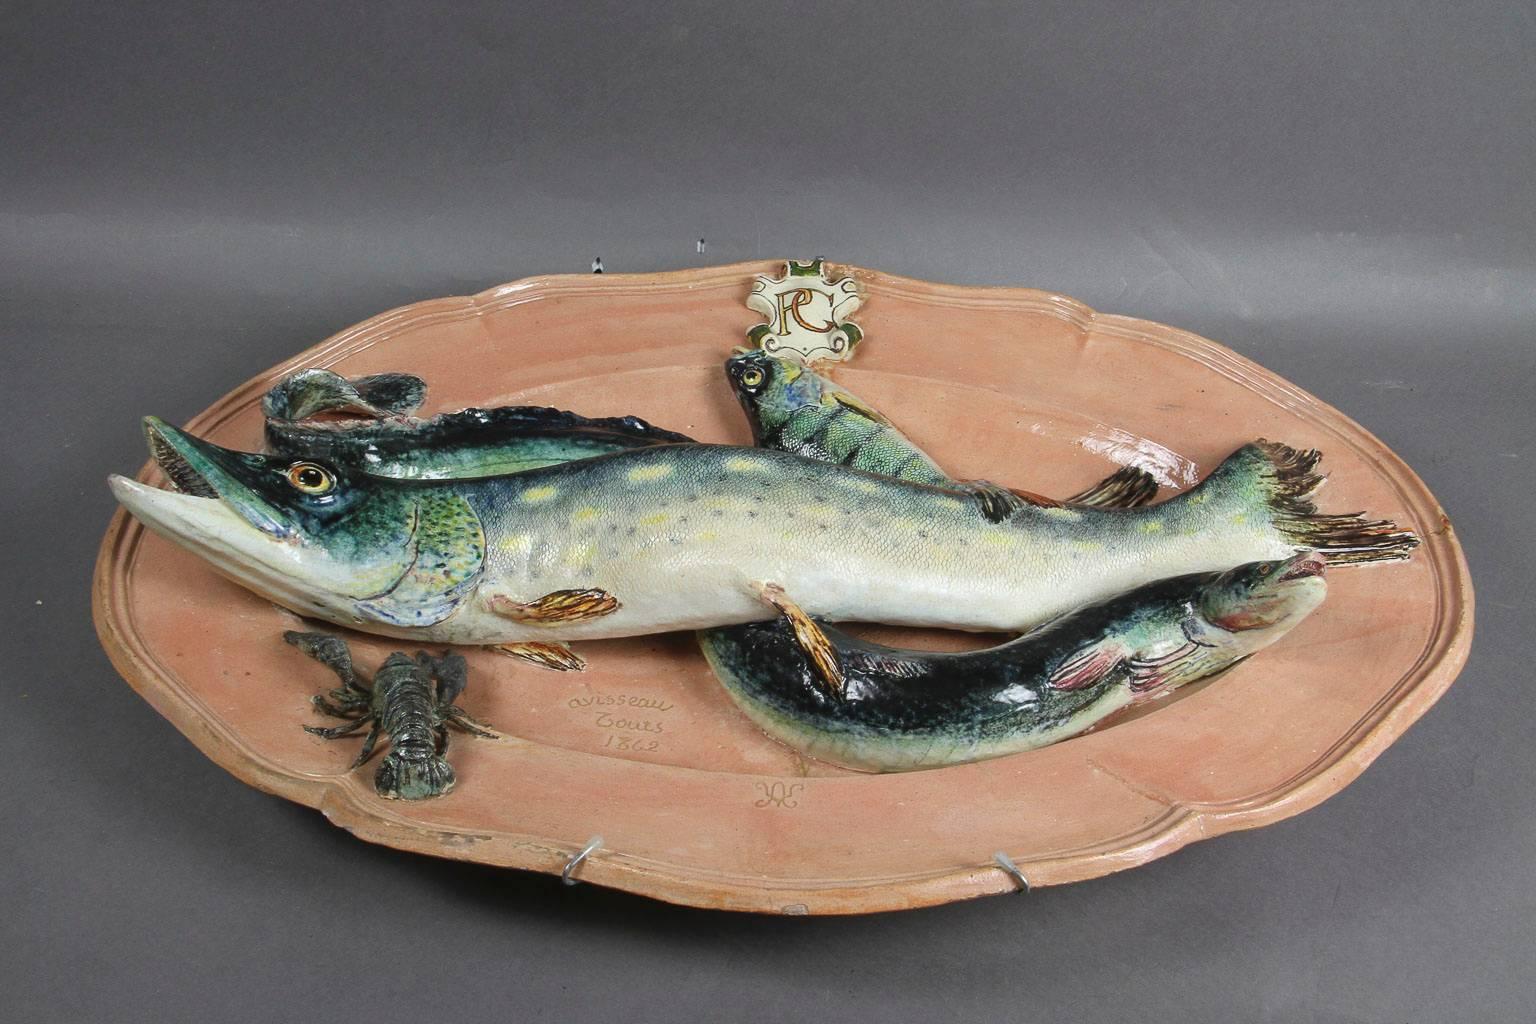 Large platter with crest and initials PG, decorated with a pike, eel and a crayfish. All on a peach colored platter. Signed.